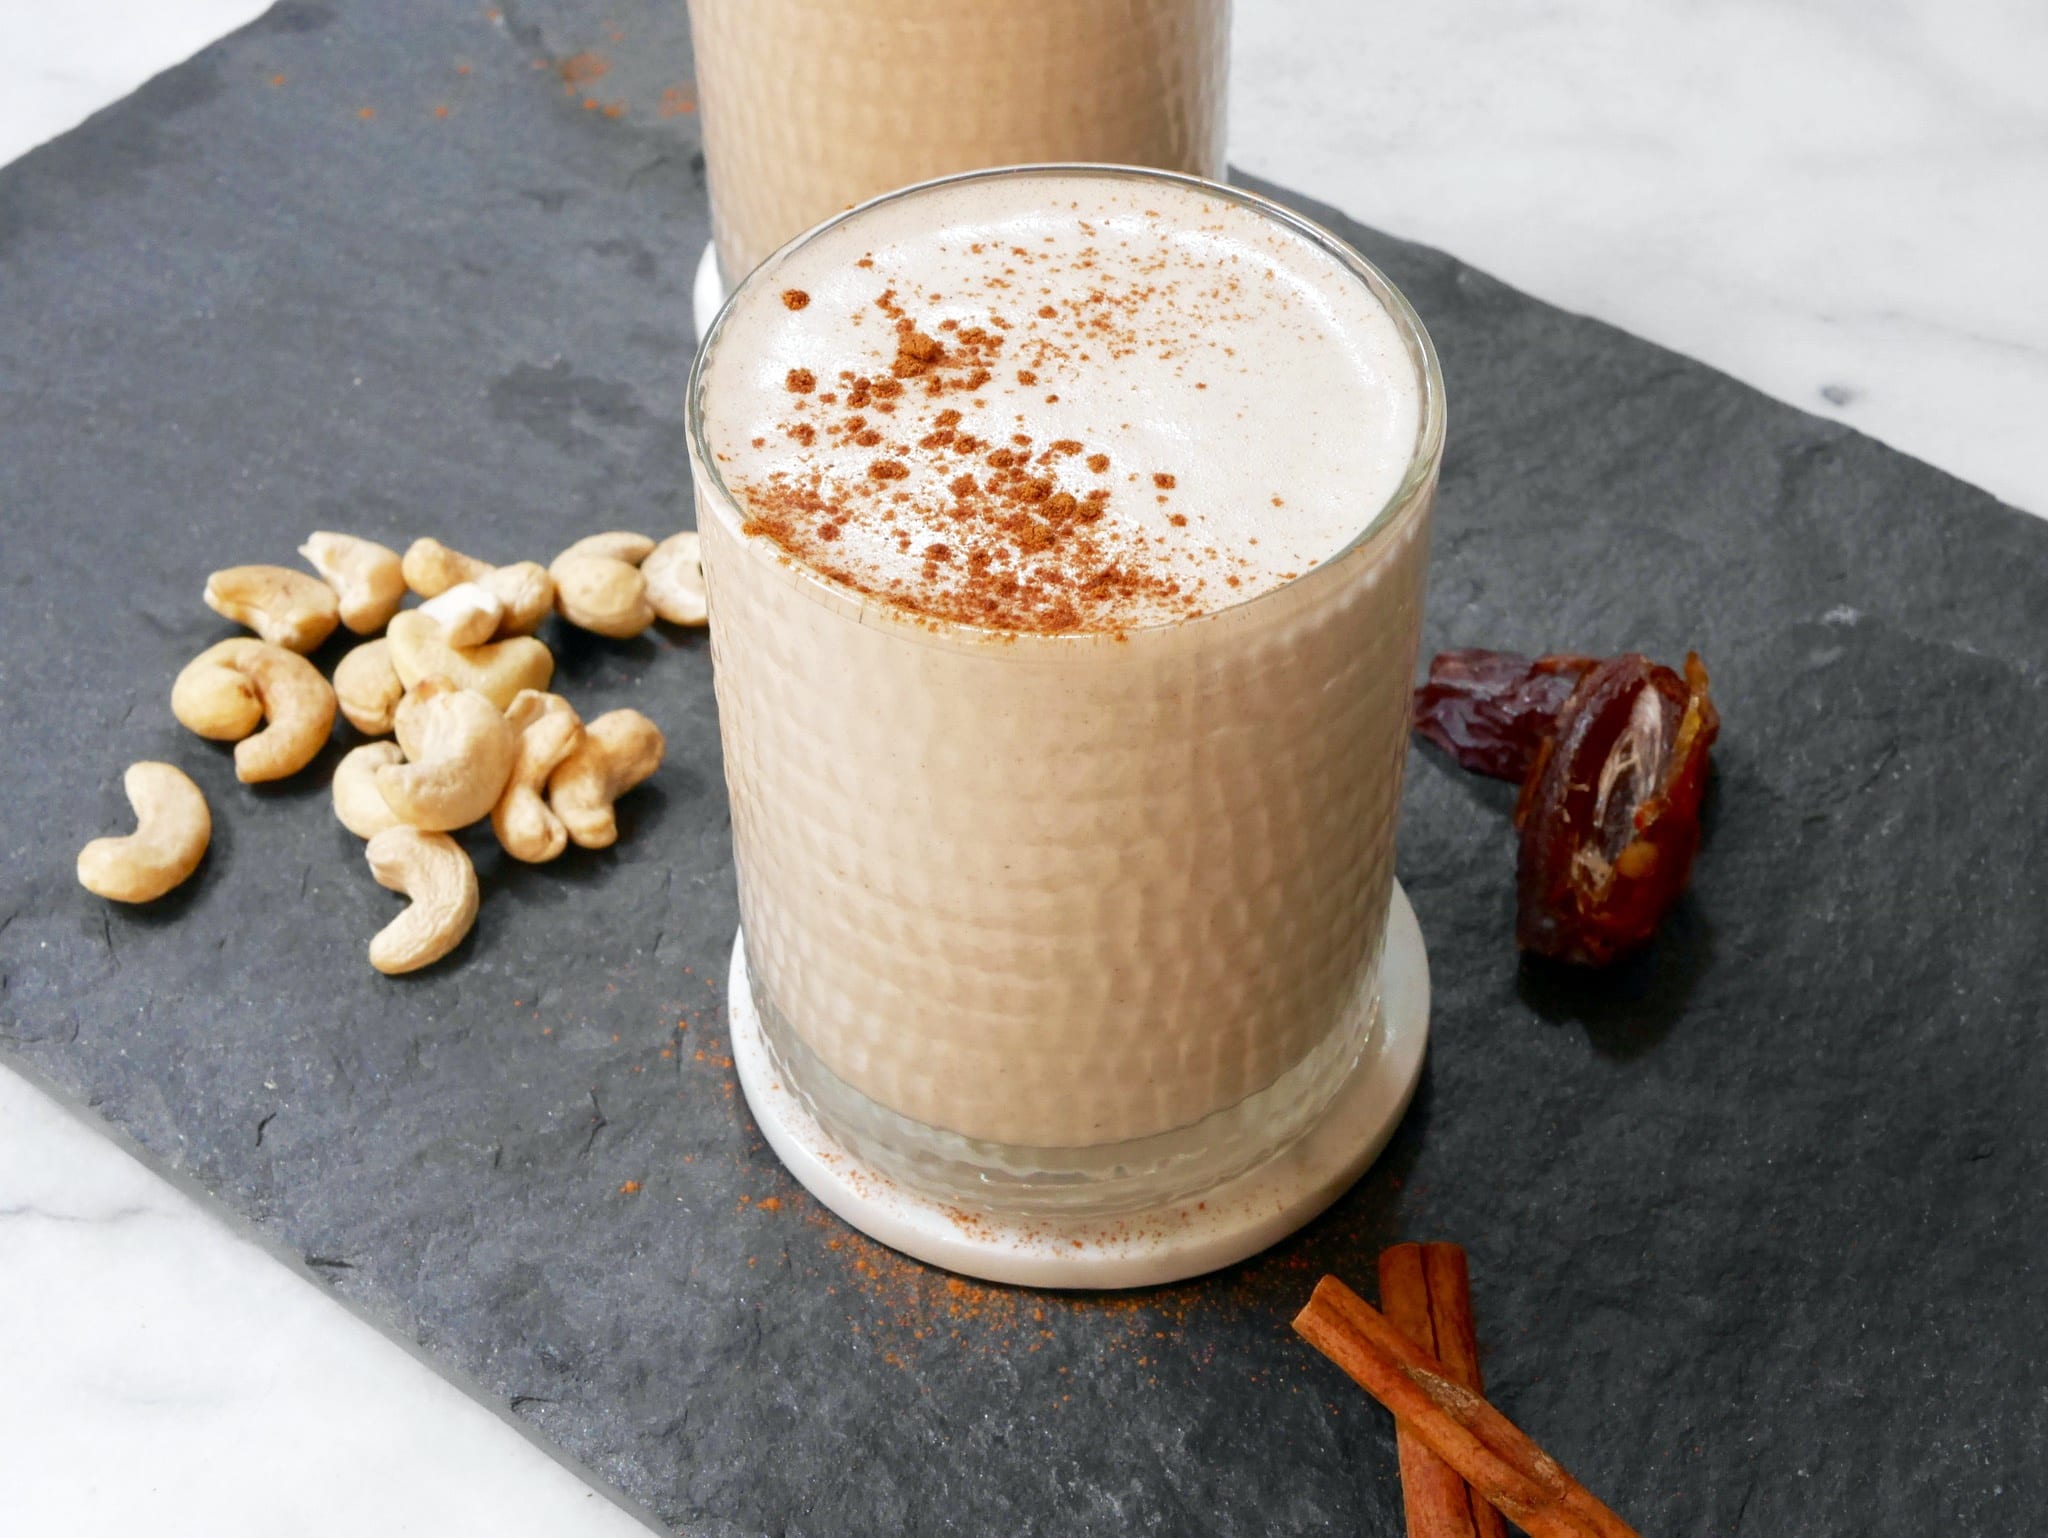 Ring In The Season With This Vegan Eggnog